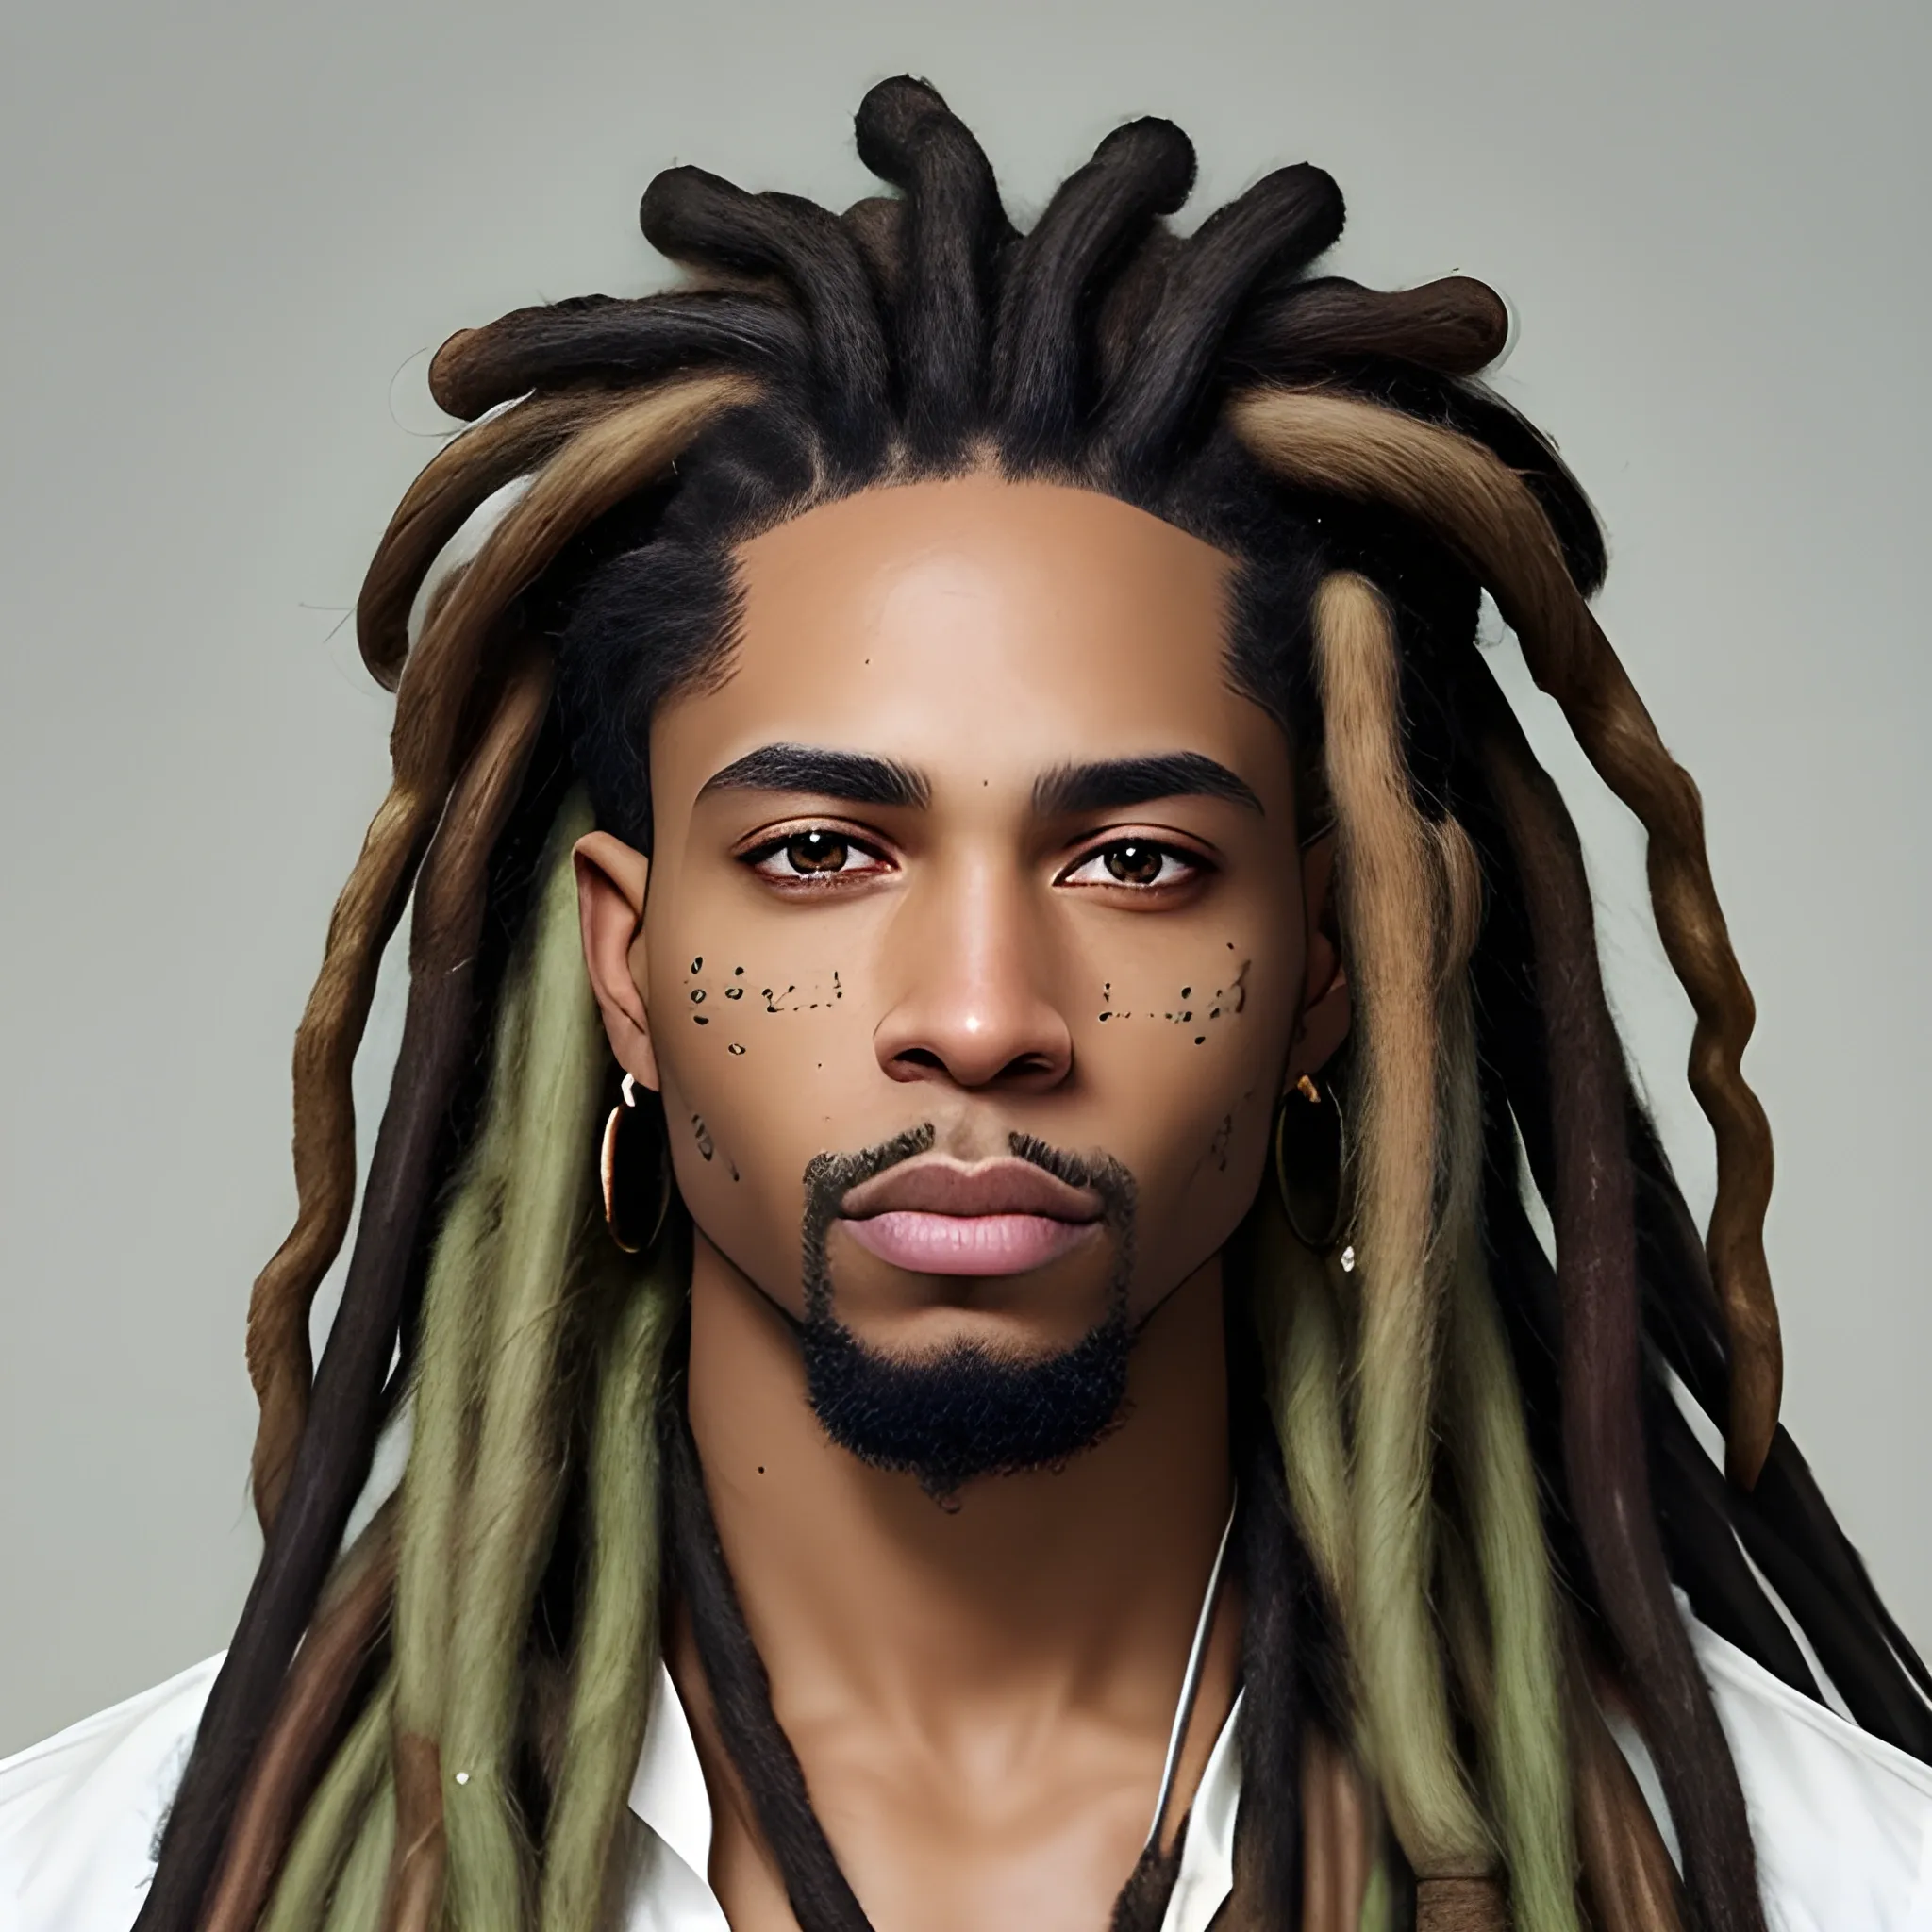 In this photograph, we aim to create a stunning image of a handsome black man with perfectly detailed green eyes and long waist-length dreadlocks. The focus is on portraying a realistic representation that highlights his captivating features and beauty.

Characteristics of the Man:

A black man with distinct African features, exuding strength and charm.
His mesmerizing green eyes, carefully rendered to showcase their depth and brilliance, adding a touch of intrigue to the image.
Long dreadlocks, extending down to his waist, reflecting his unique style and cultural identity.
Facial Details:

The facial features should be intrinsically detailed, capturing his striking good looks and magnetic charisma.
Emphasize his strong jawline, high cheekbones, and well-proportioned lips, all contributing to his captivating allure.
The eyes should be the focal point, their green color drawing the viewer in and conveying a sense of depth and soulfulness.
Skin Detail:

The skin should be rendered with exceptional realism, reflecting its rich and smooth texture, and highlighting its natural beauty.
Pay close attention to the interplay of light and shadow, accentuating the natural contours of his face.
Dreadlocks:

The dreadlocks should be meticulously detailed, capturing their individual strands and distinct texture.
Showcase the length and movement of the dreadlocks, adding to the overall appeal of the image.
Attire and Setting:

The man can be dressed in fashionable or culturally relevant attire, enhancing his persona and style.
Choose a setting that complements his charm and demeanor, whether it's an urban backdrop, a natural environment, or a cultural setting.
Photography Technique:

Aim for a high-resolution photograph that impeccably captures every aspect of his appearance, from the eyes to the dreadlocks.
Utilize lighting to accentuate his facial features and draw attention to the captivating green eyes.
The composition should be carefully crafted to showcase his unique beauty and personality., Pencil Sketch